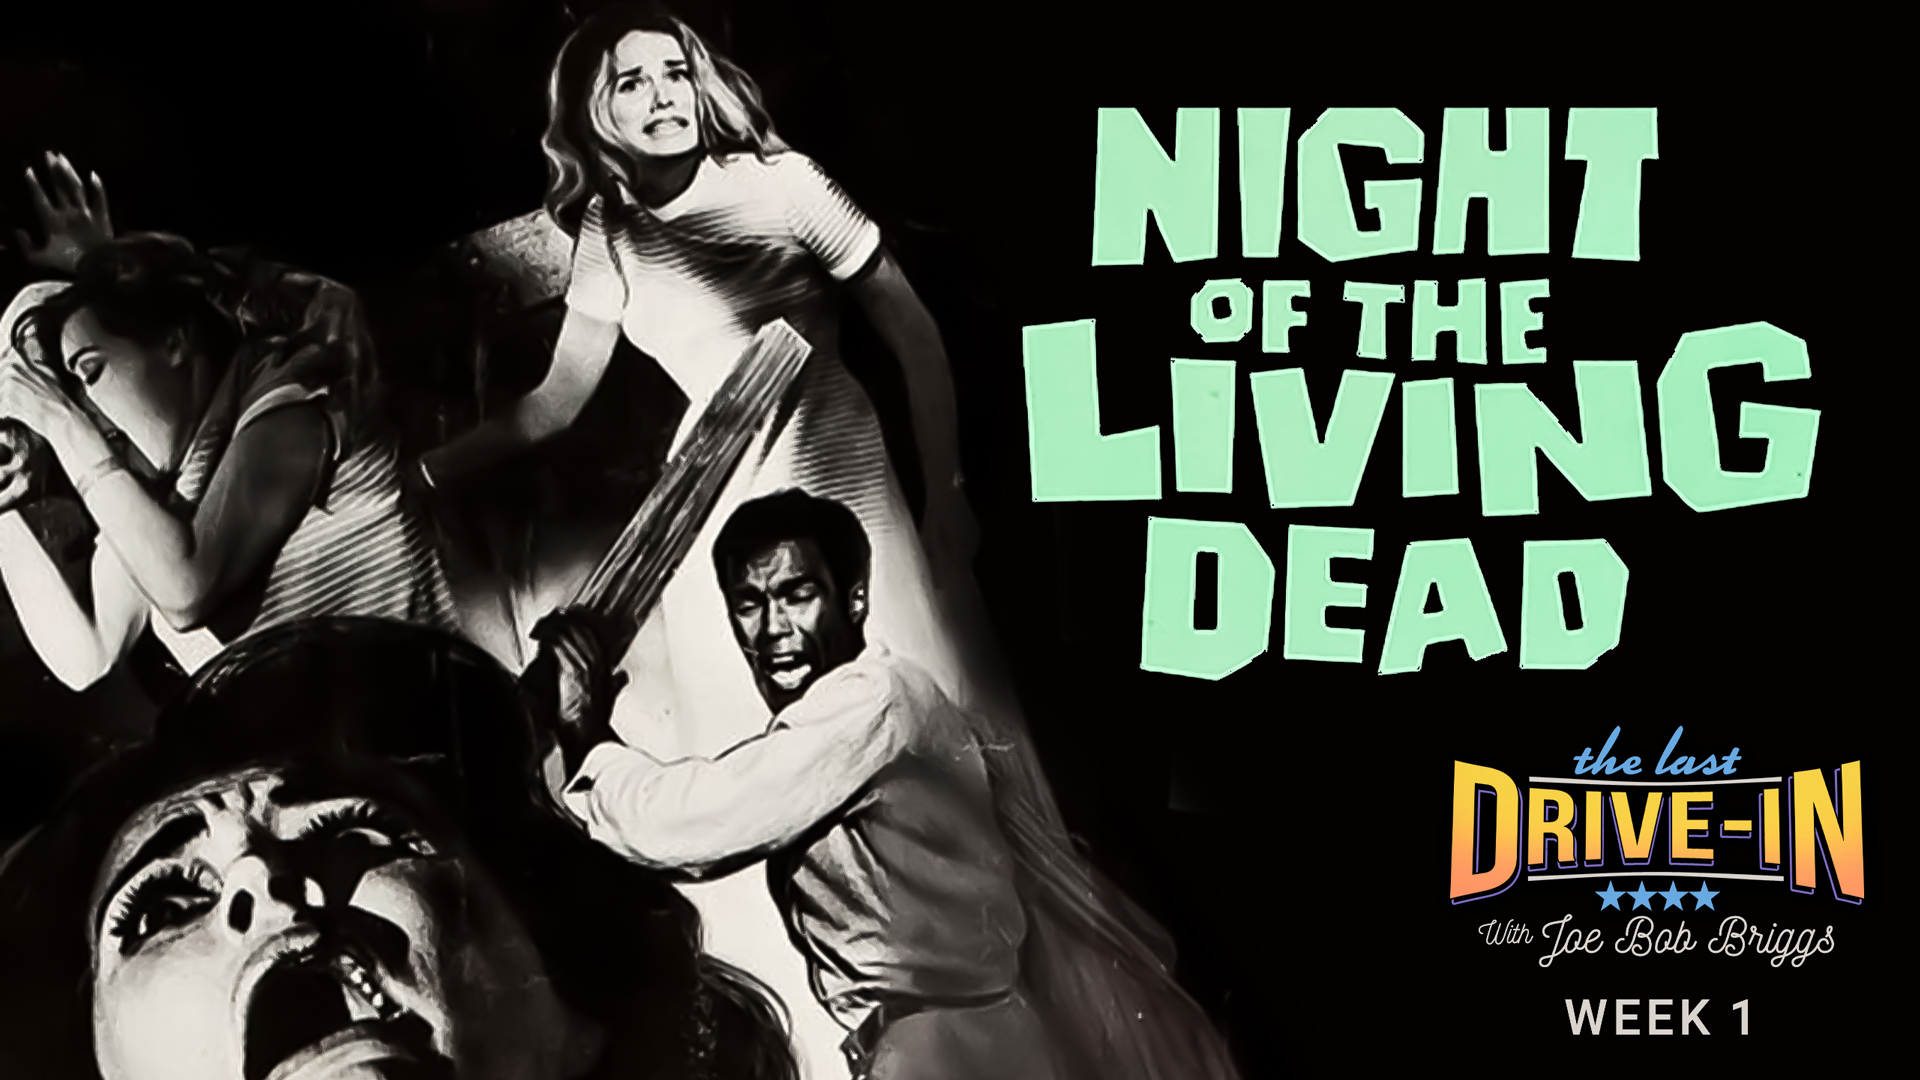 Night of the Living Dead, George Romero's original zombie classic introduced viewers to a new type of terror., TV-MA, Season 1053667, Episode 1